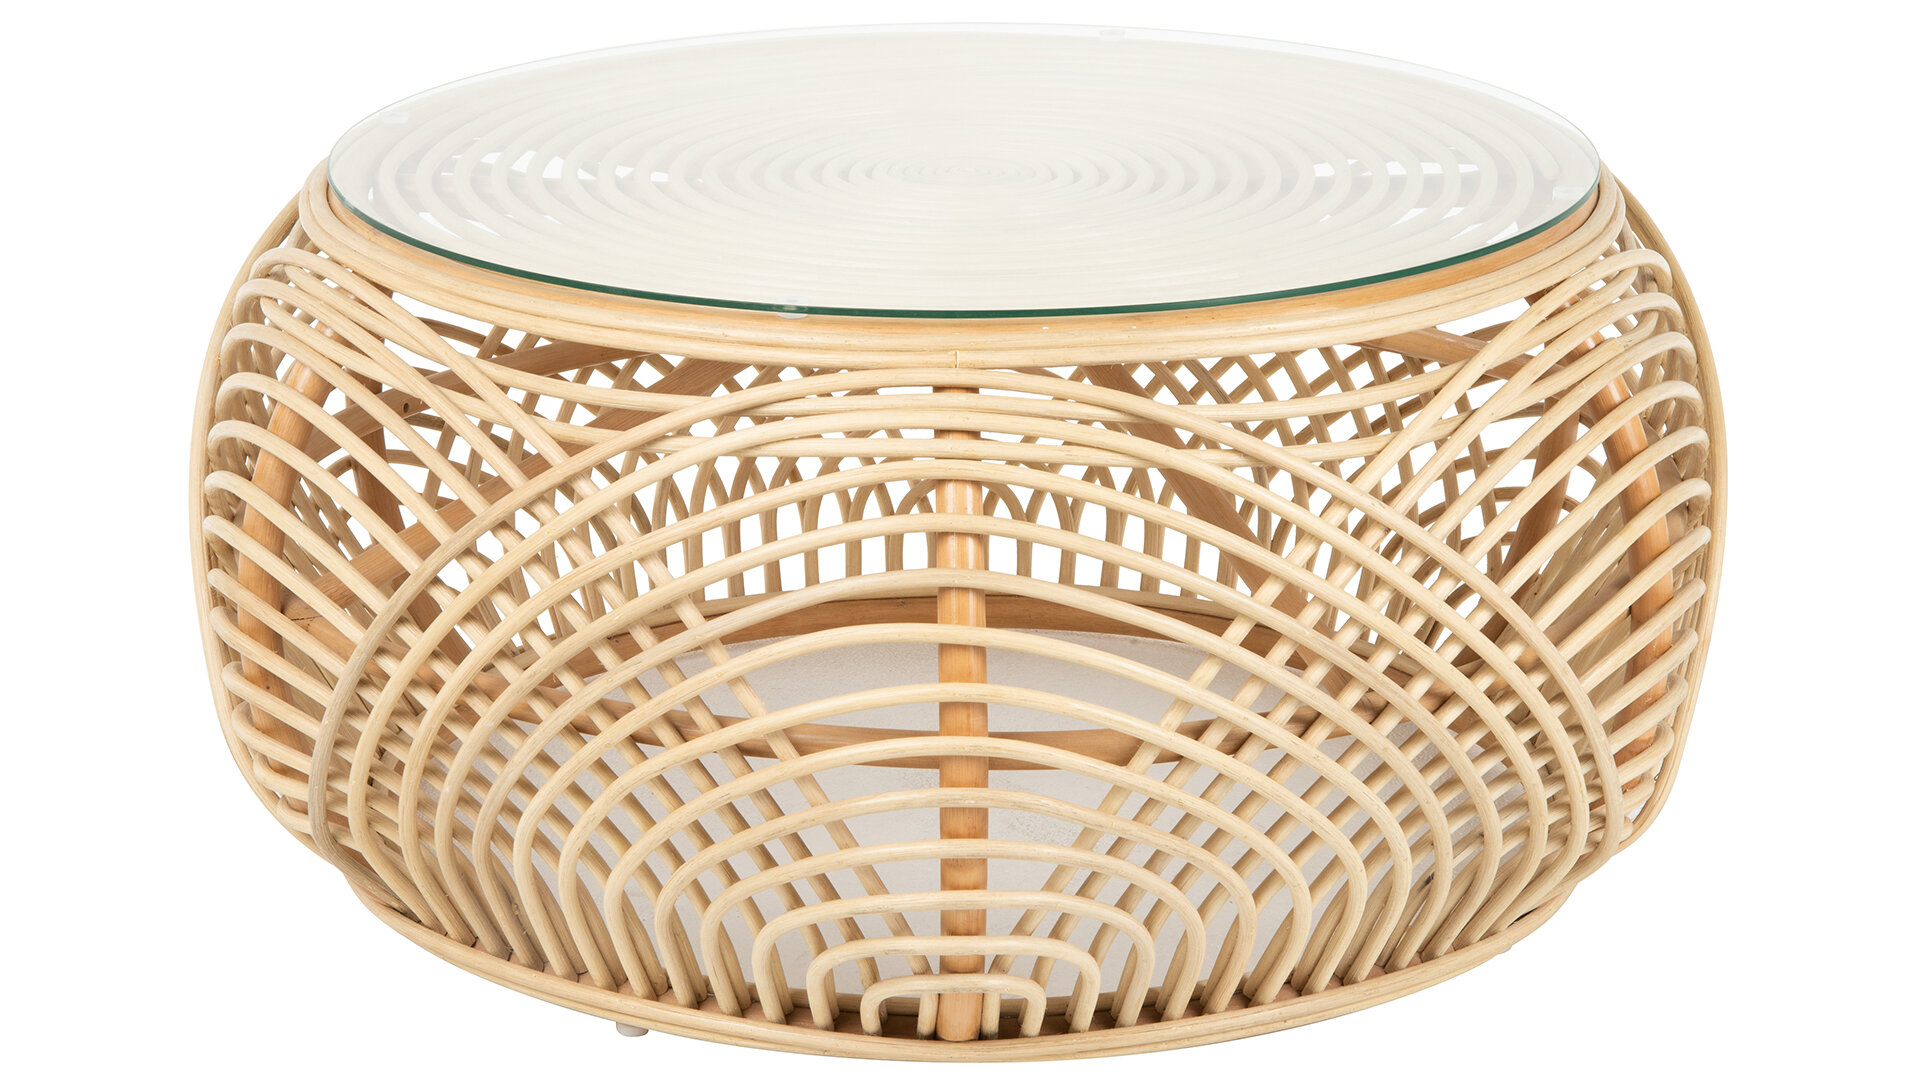 Rattan Coffee Table Visualhunt, Round Wicker End Table With Glass Top